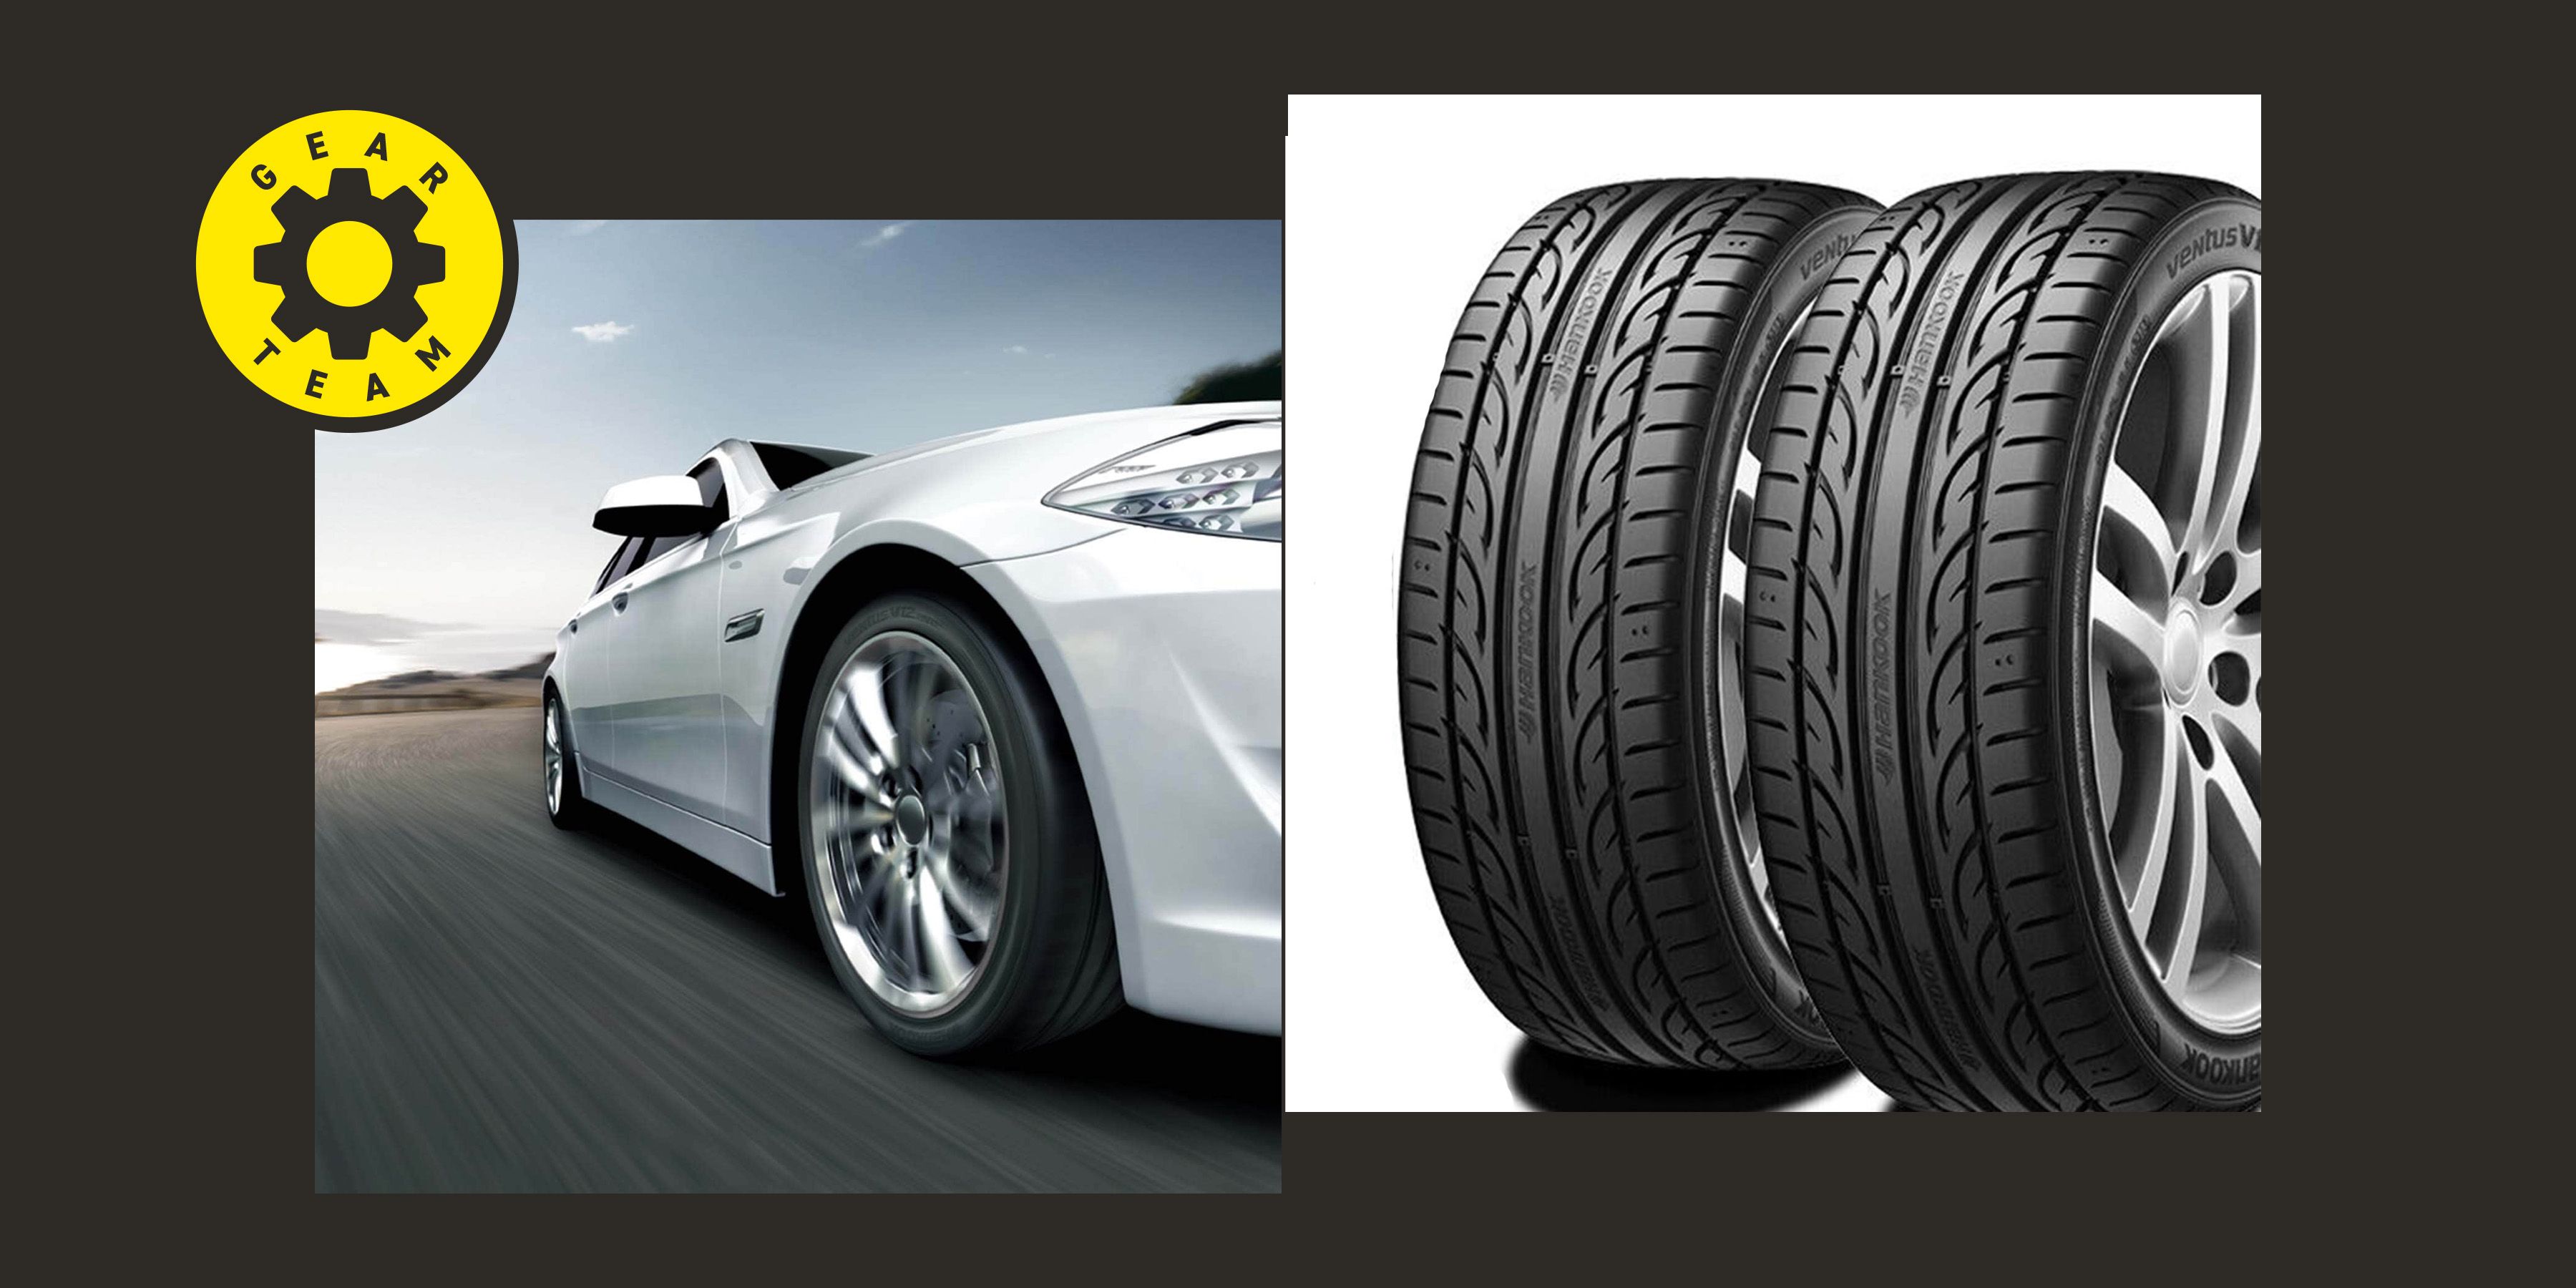 Deal Alert: eBay Motors Has Inexplicably Insane Deals on Summer Tires Right Now